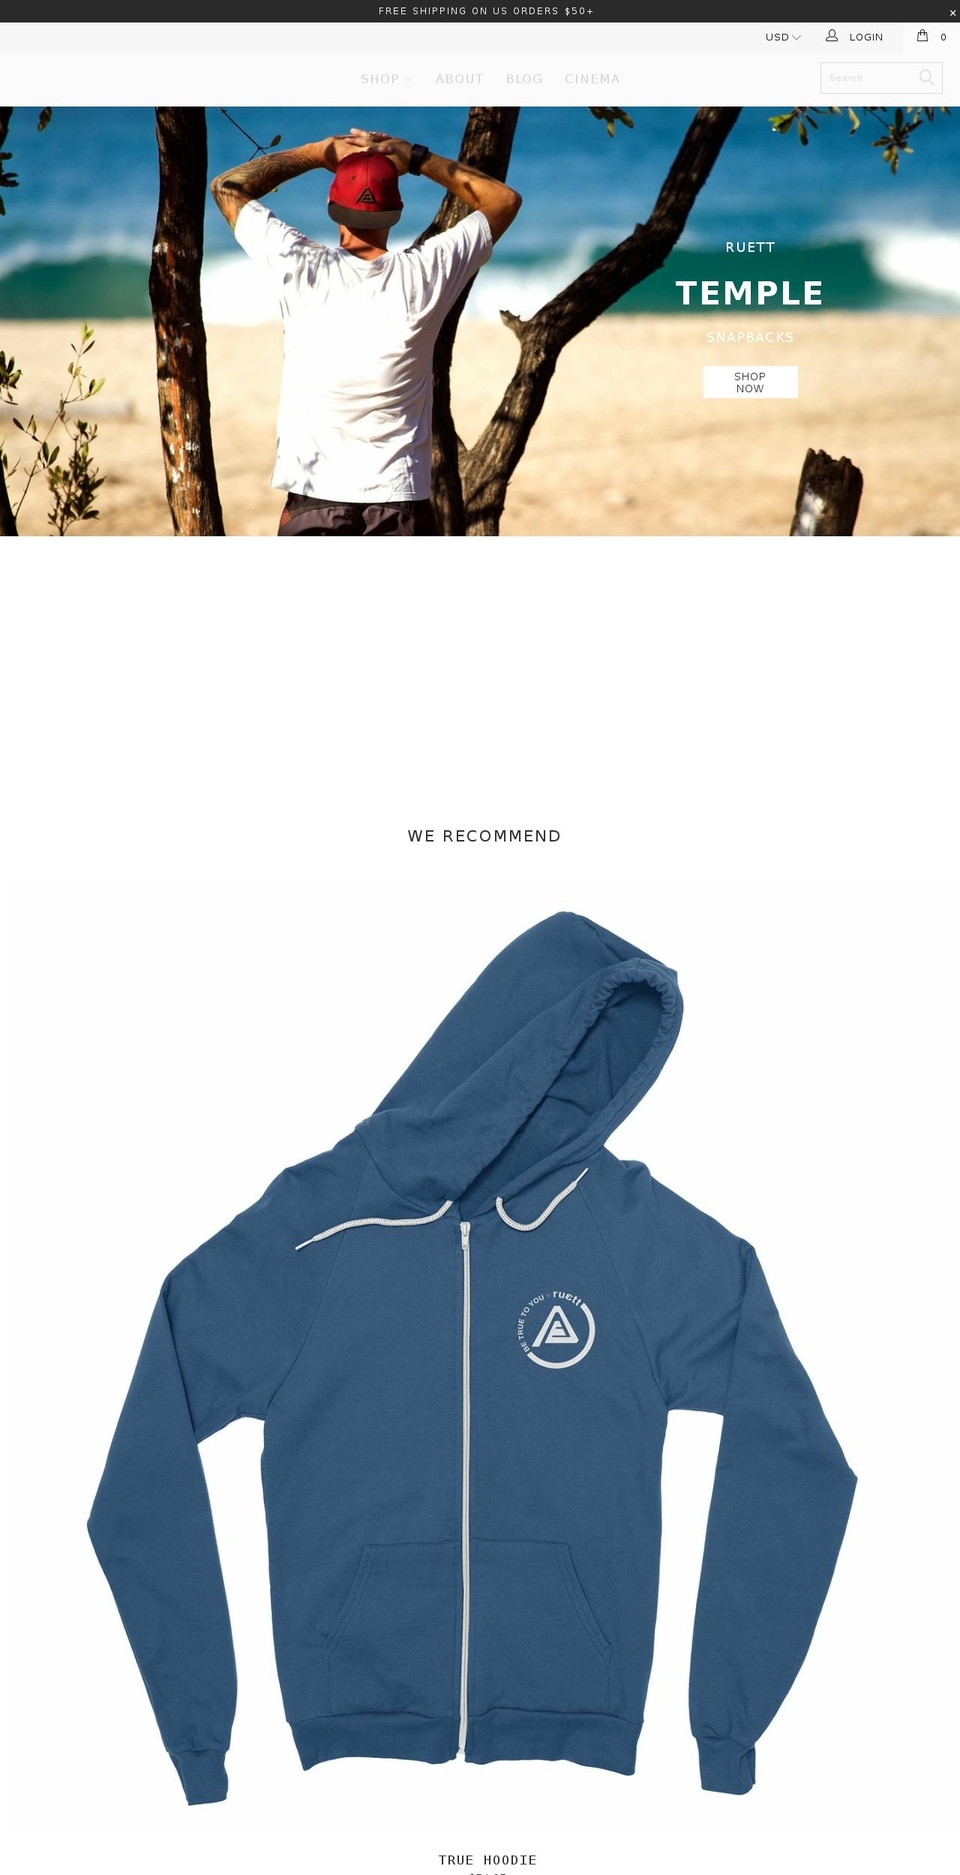 August Shopify theme site example ruettclothing.com